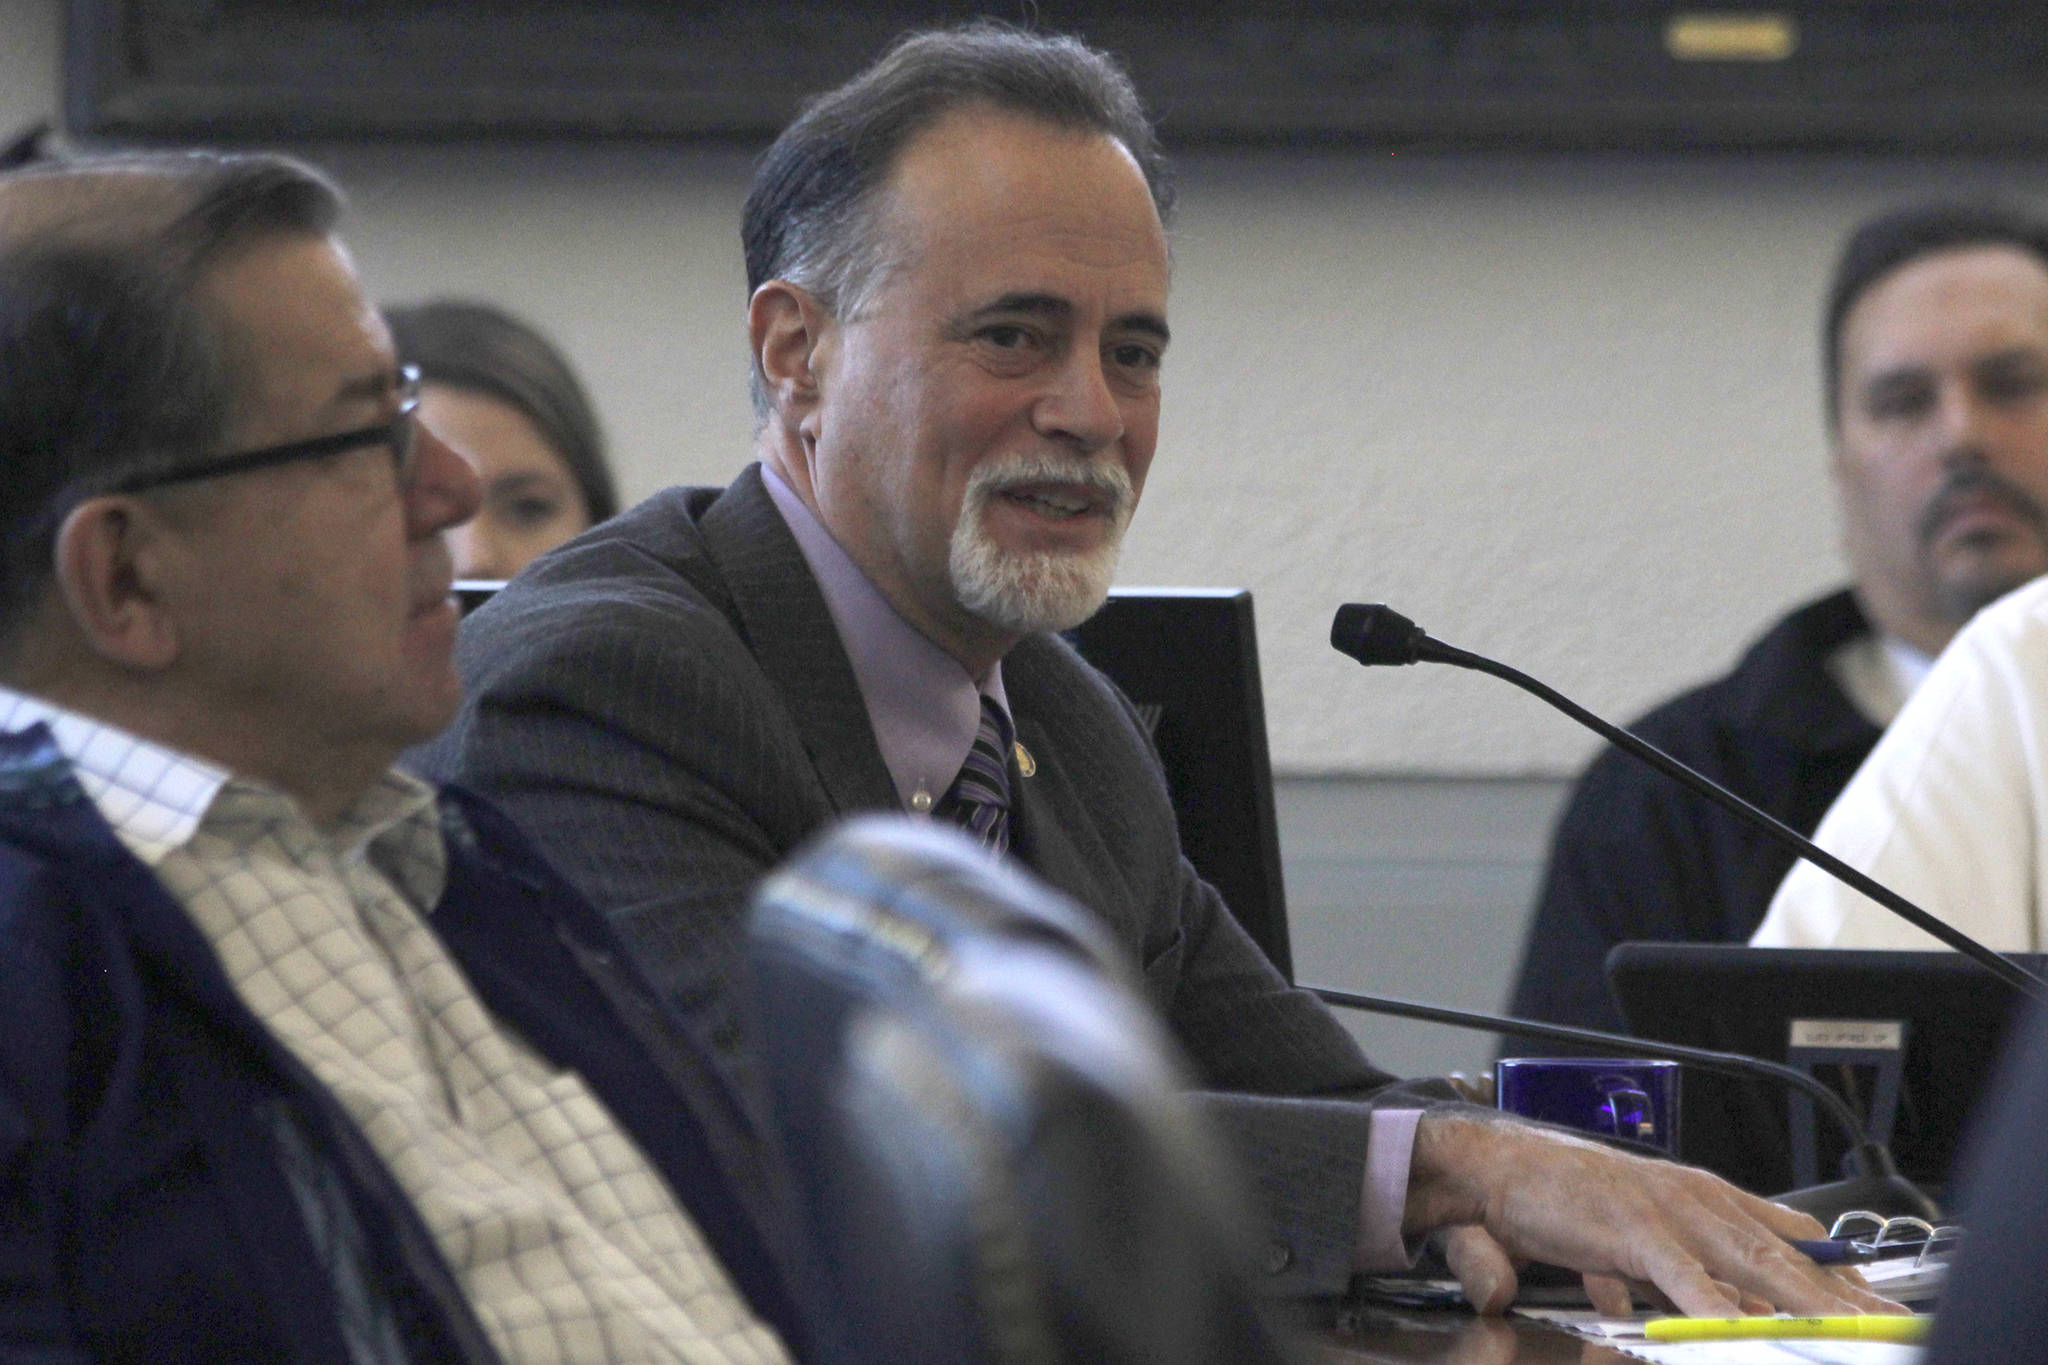 Sen. Peter Micciche, R-Soldotna, poses questions to Department of Corrections and Office of Management and Budget officials during a Senate Finance Committee meetingon Friday, Feb. 15, 2019. (Alex McCarthy | Juneau Empire)